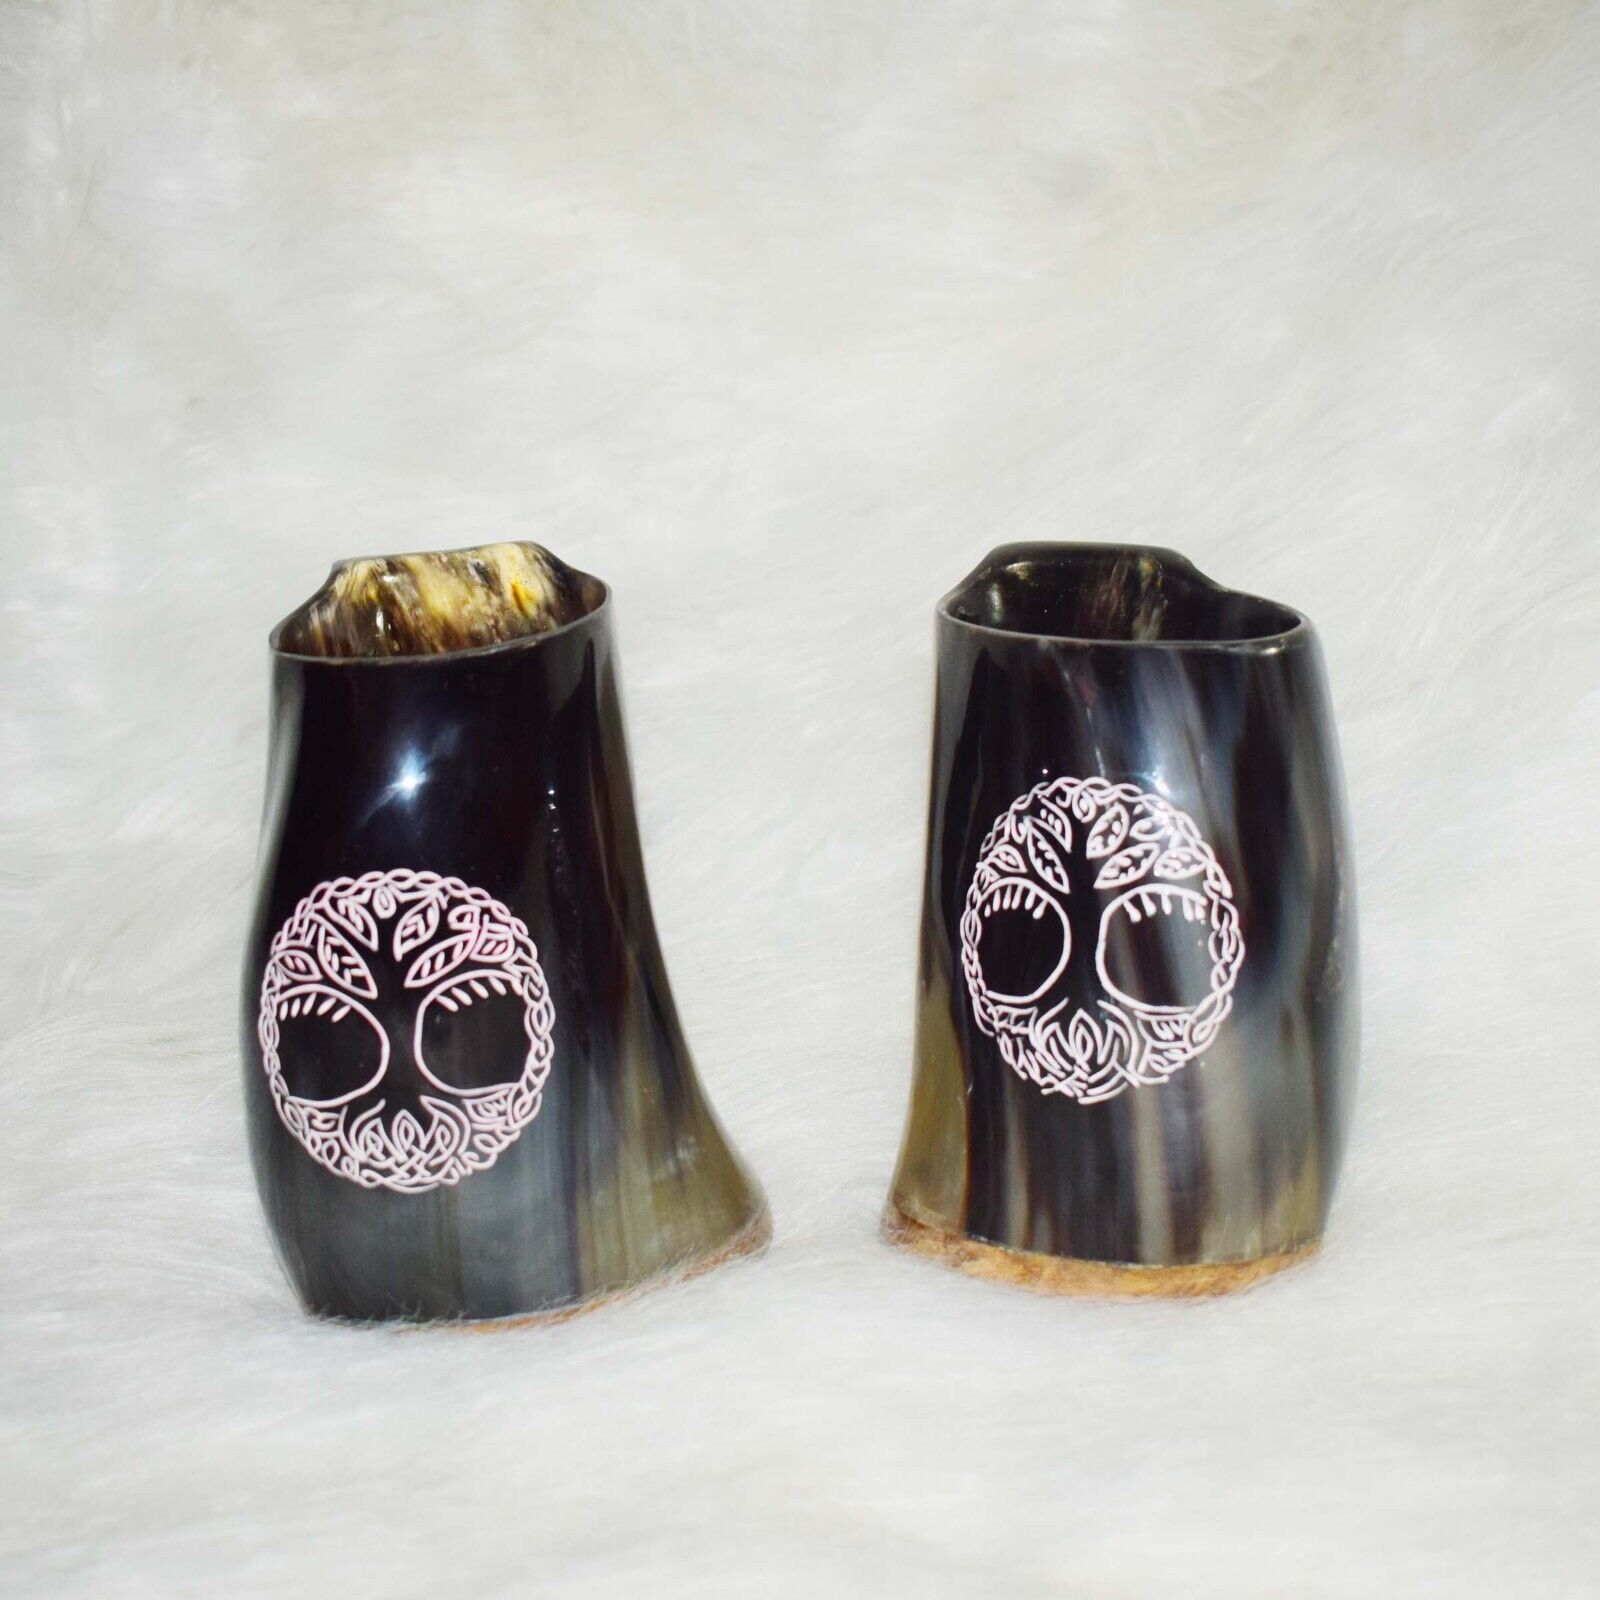 Nordic Nectar: Handcrafted Vintage Horn Mug for Ale, Mead, and More